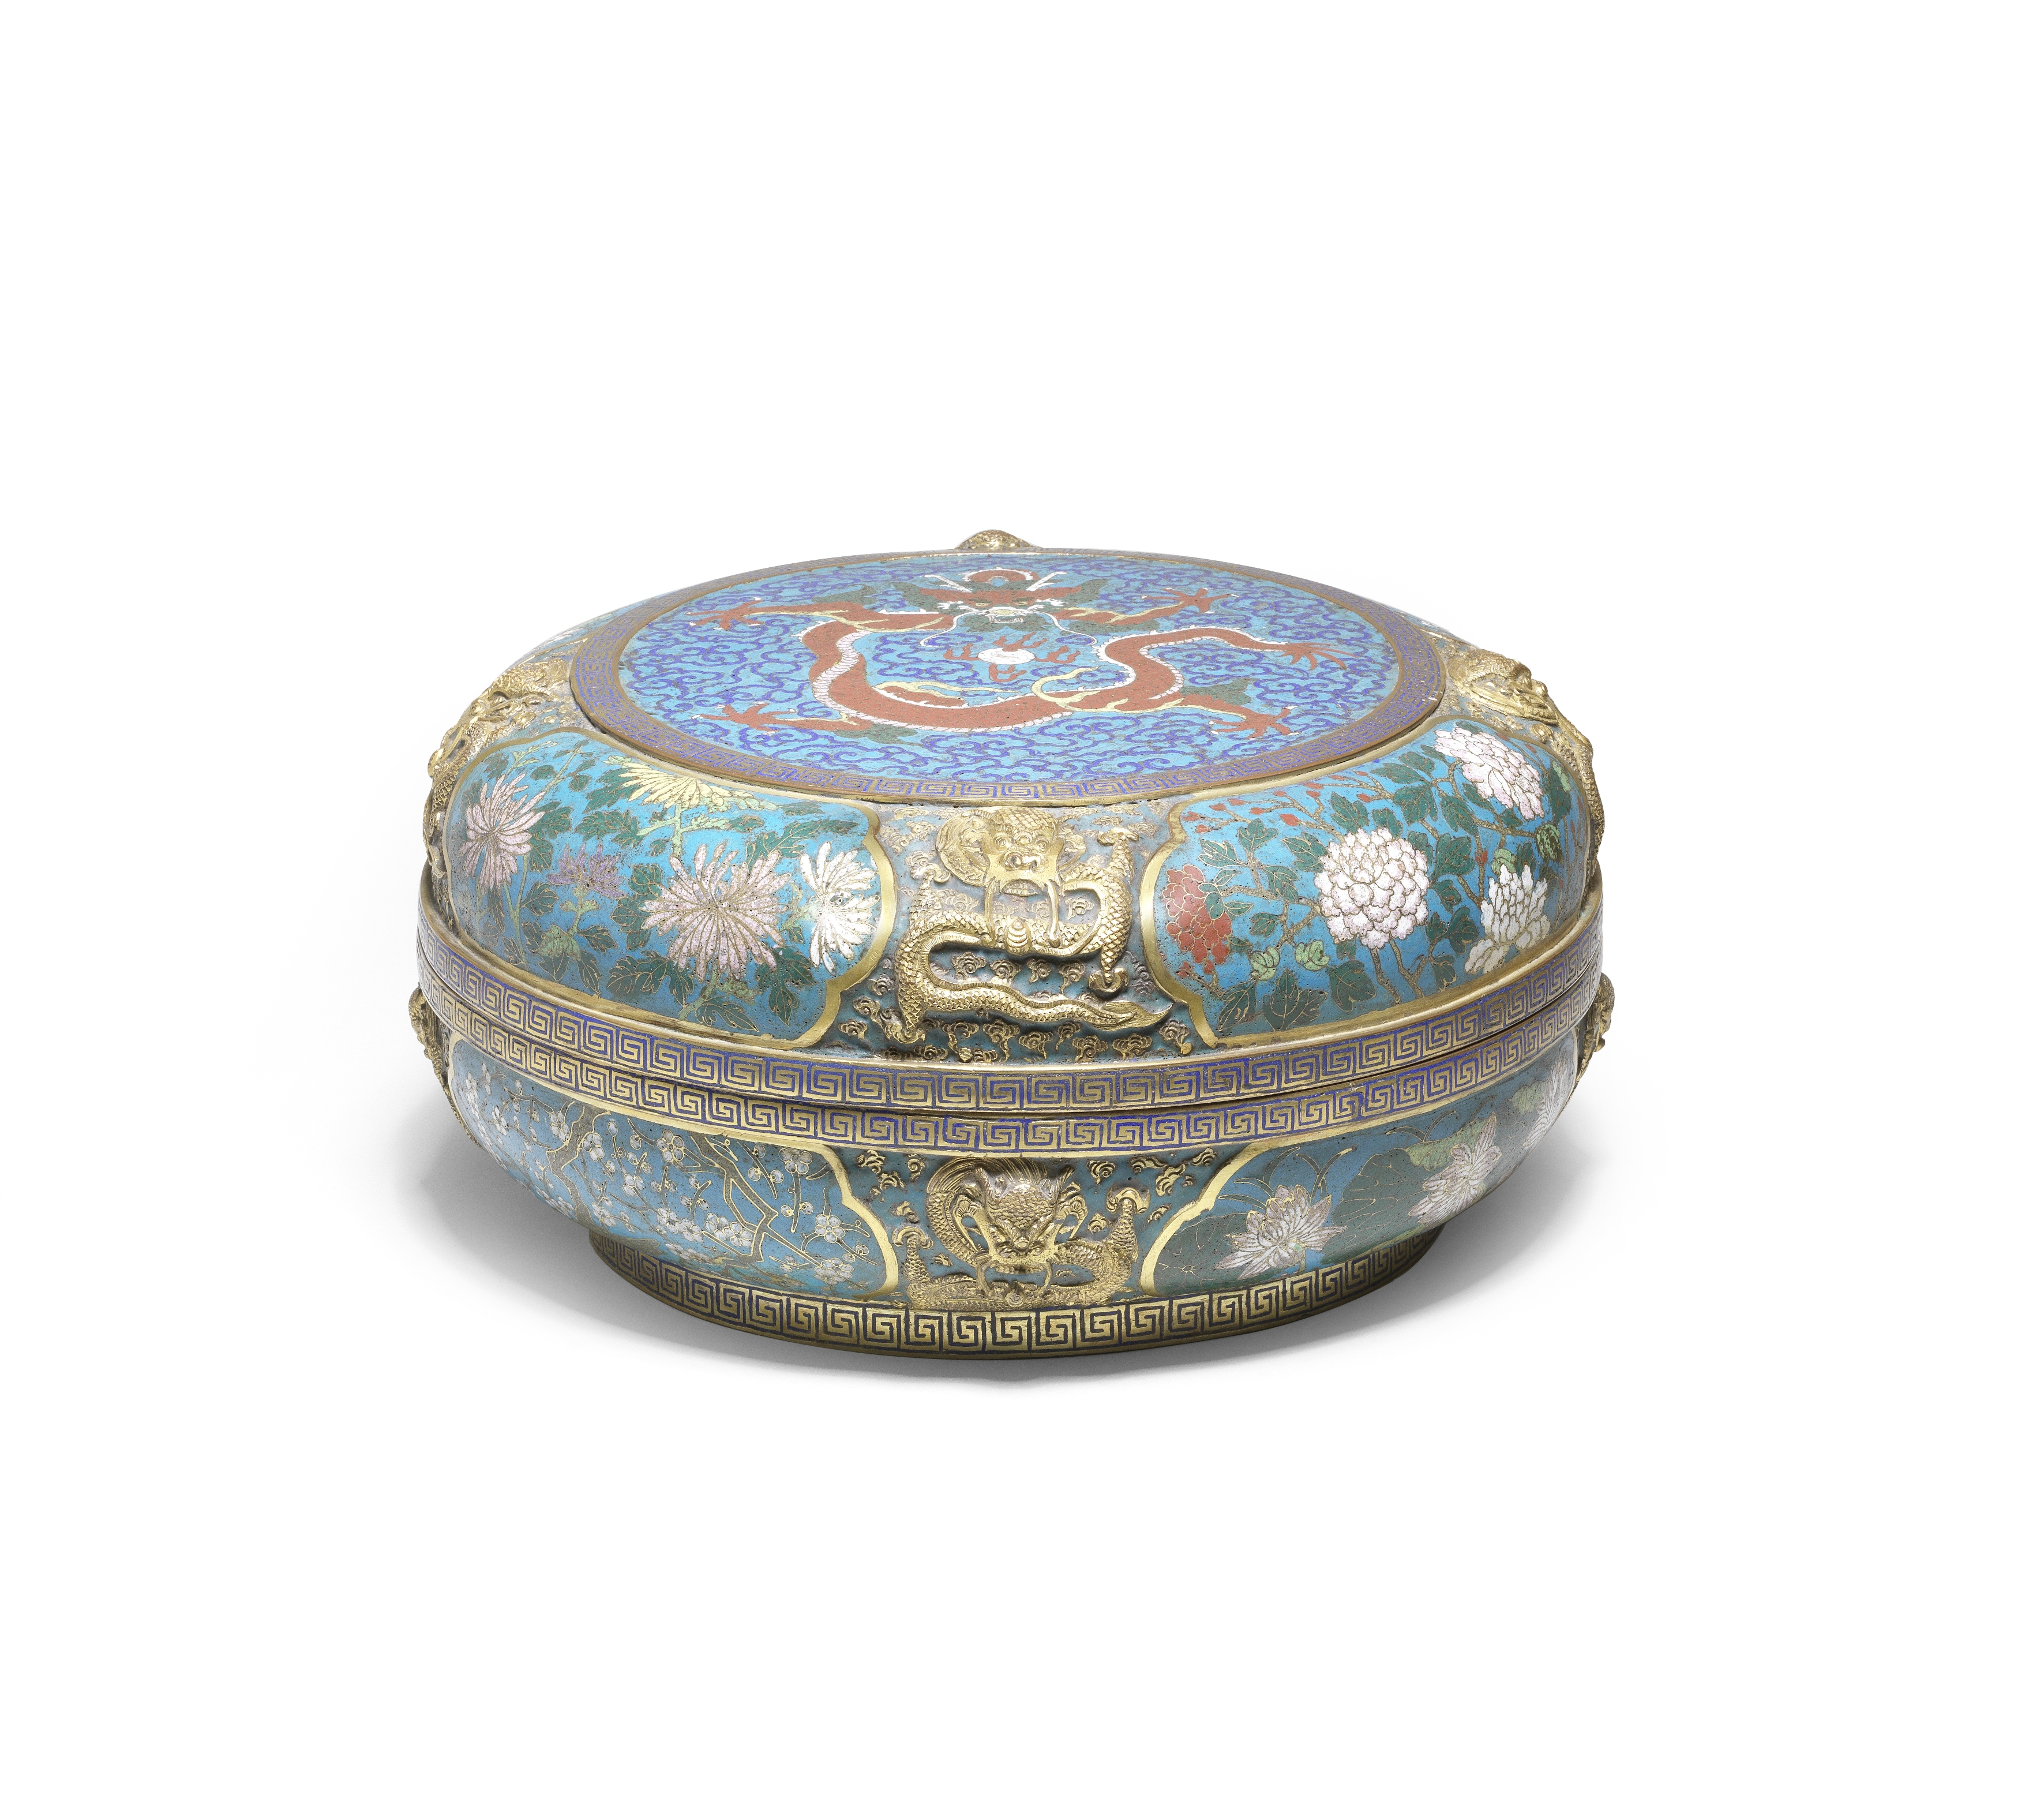 A LARGE CLOISONN&#201; ENAMEL AND GILT-BRONZE 'DRAGON' BOX AND COVER Late Qing Dynasty (2)